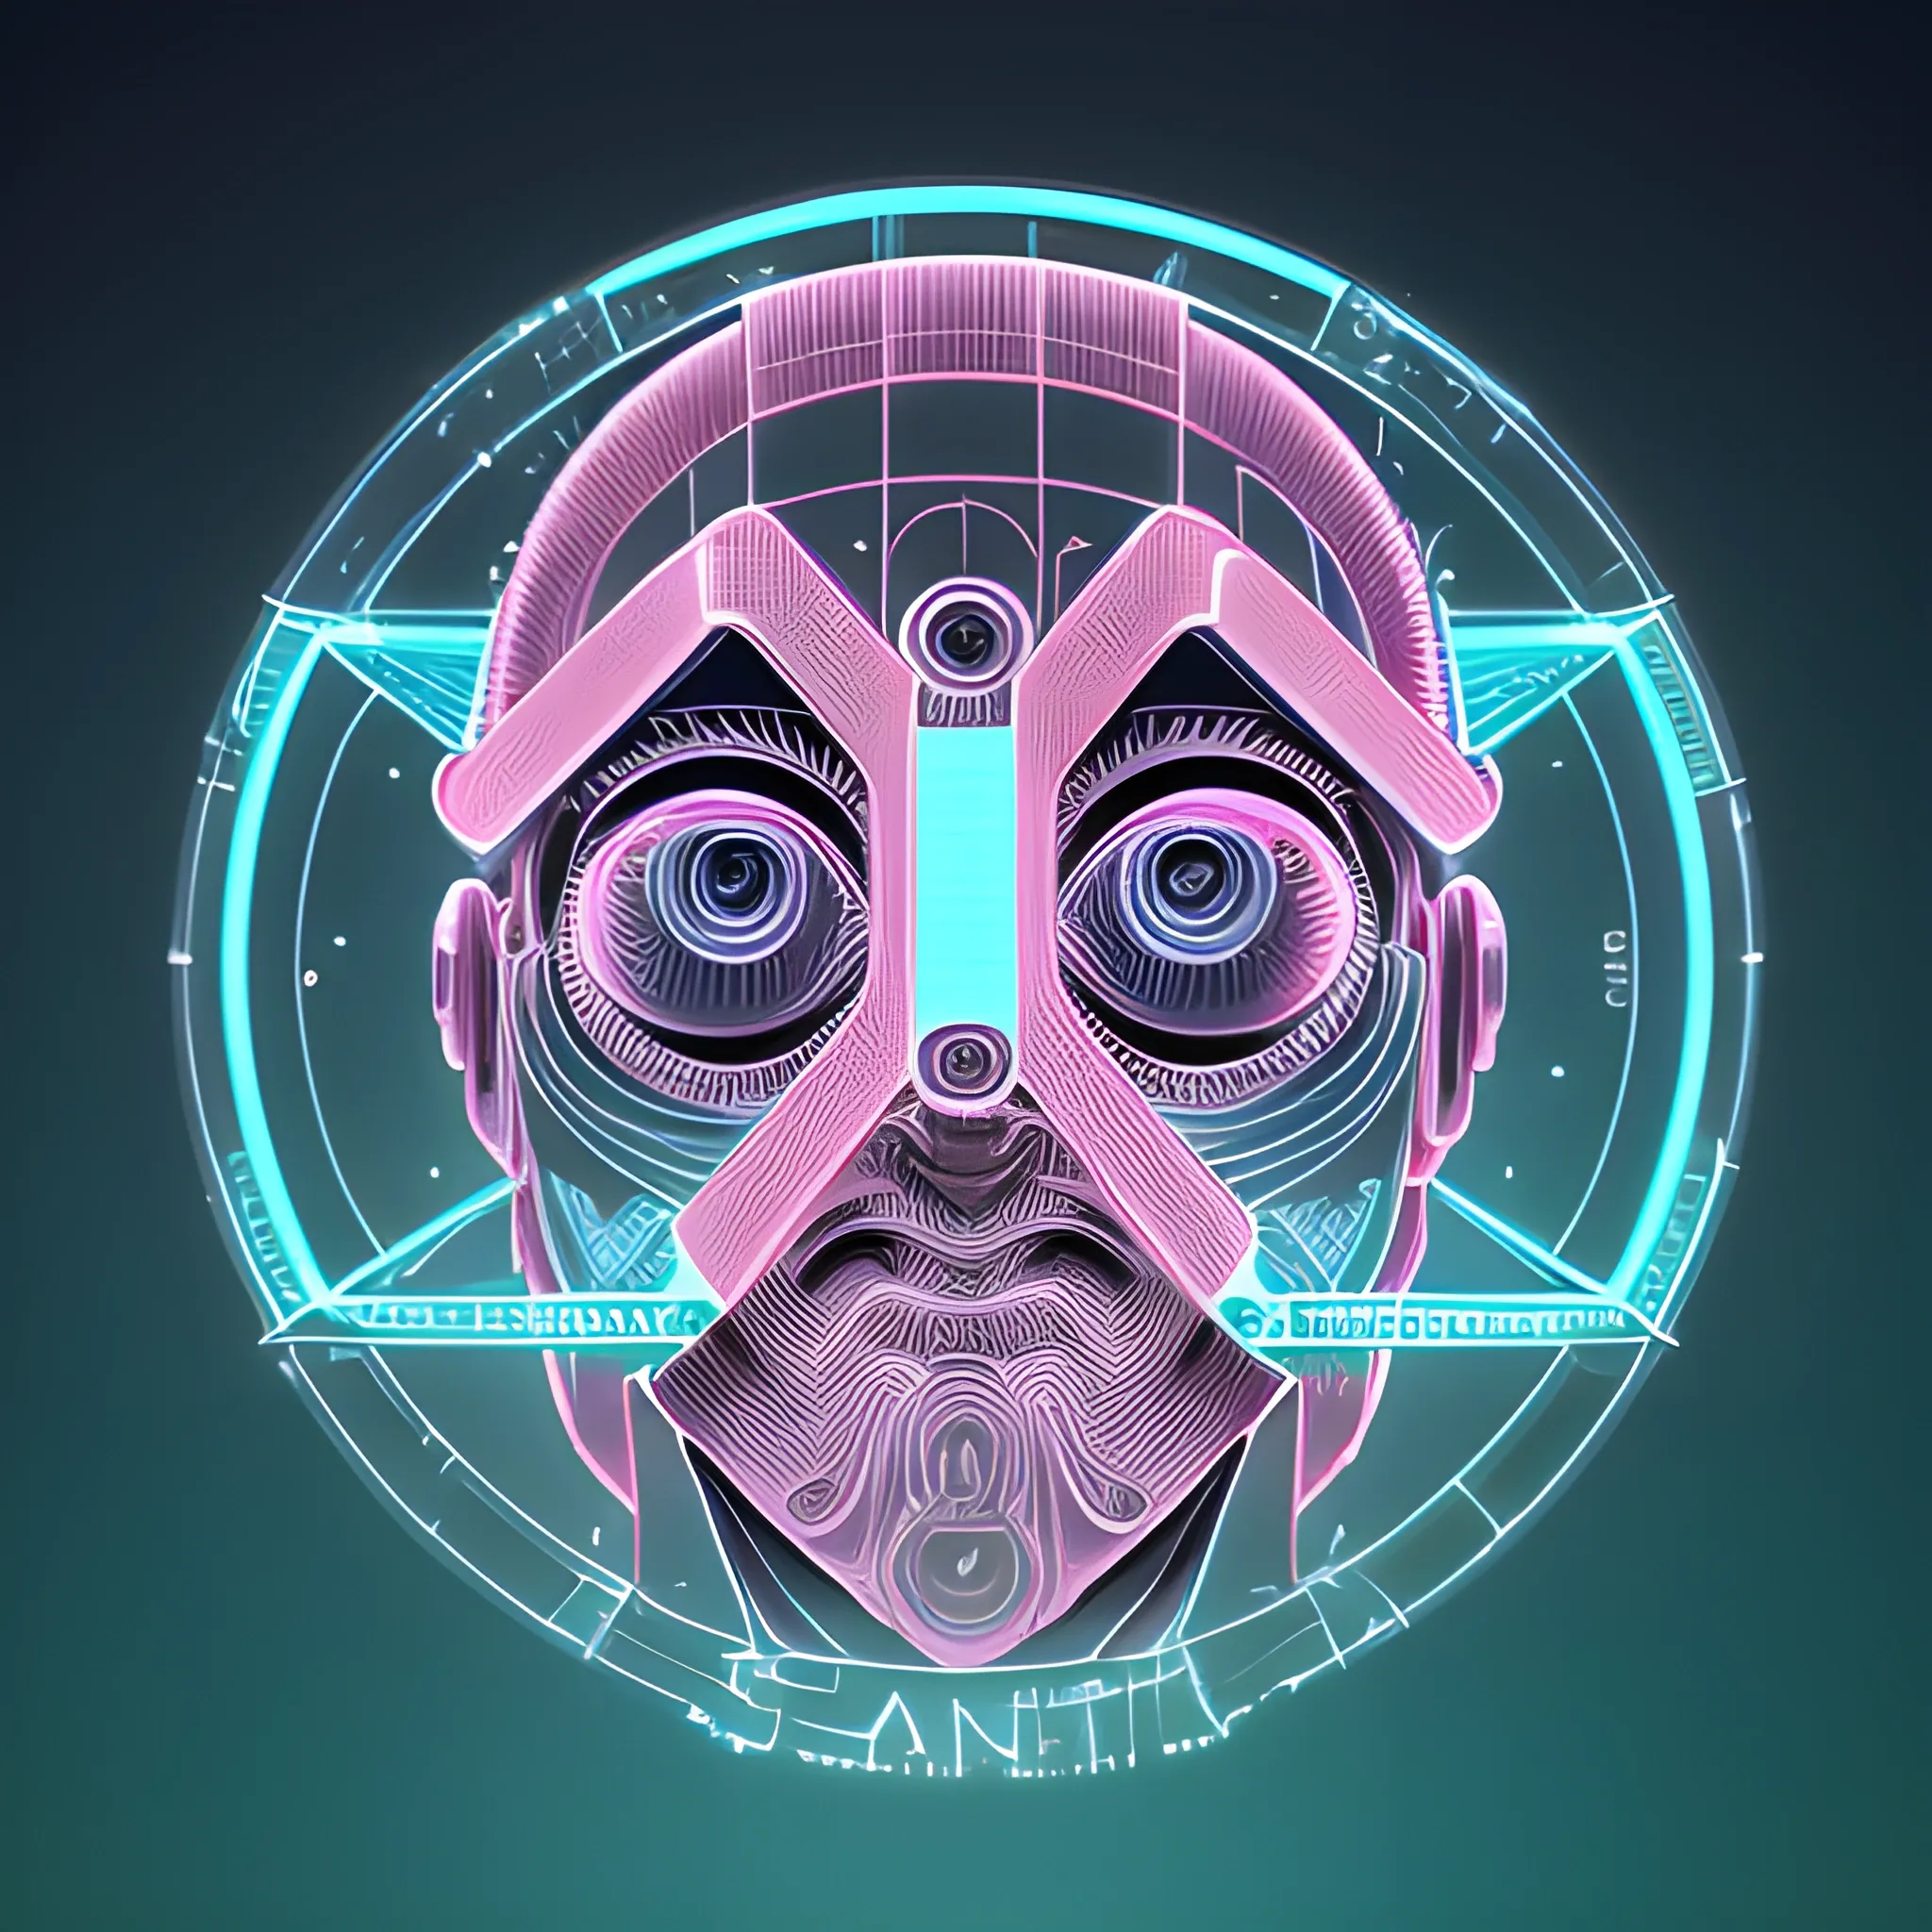  sci-fi font capital letter V, high-definition, realistic, intricate wavelength detailing, embossed circular frame, 3D, Sci-Fi, Hip-hop, Urban, pink and cyan colored, sacred geometry, circular male cybernetic avatar, glowing eyes